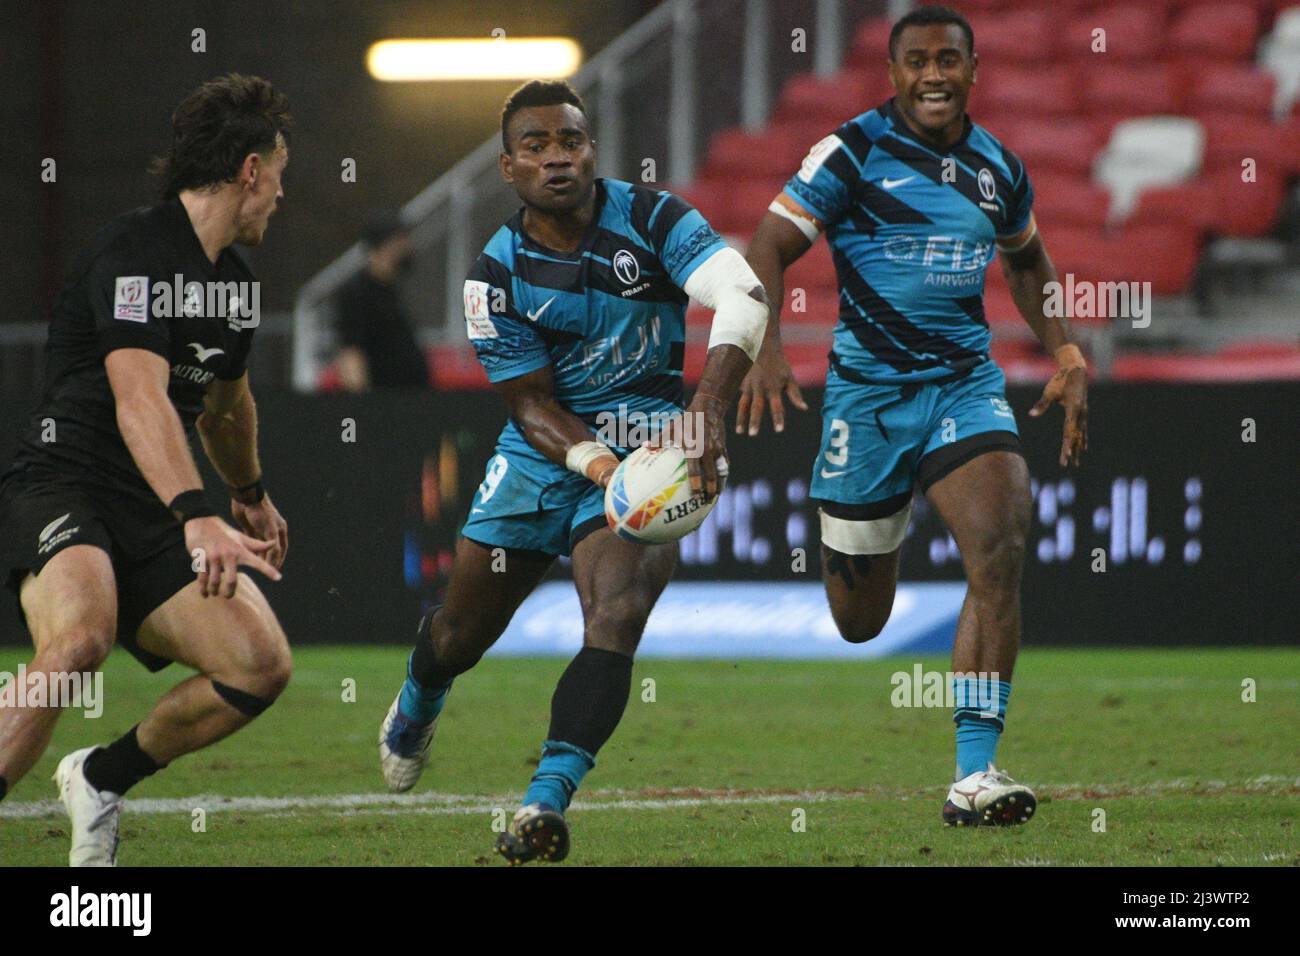 Singapore. 10th Apr, 2022. Jerry Tuwai (C) of Fiji competes during the final between New Zealand and Fiji at the HSBC World Rugby Sevens Singapore stop, held in the National Stadium on April 10, 2022. Credit: Then Chih Wey/Xinhua/Alamy Live News Stock Photo